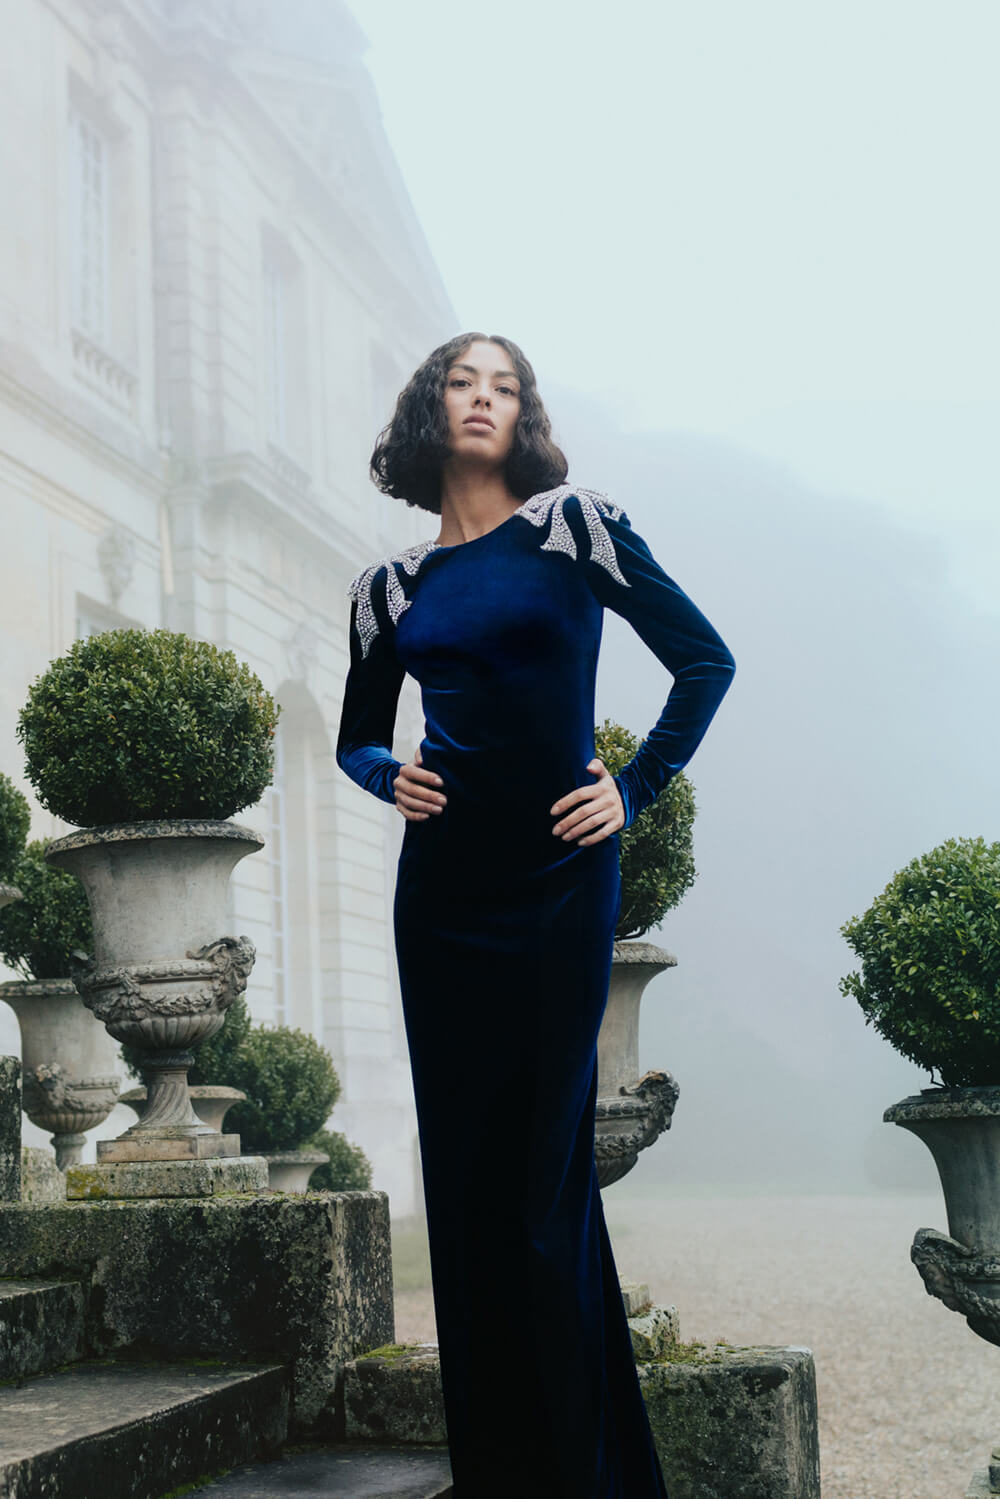 Monique Lhuillier navy velour gown with long sleeves, ruched back and embroidery.